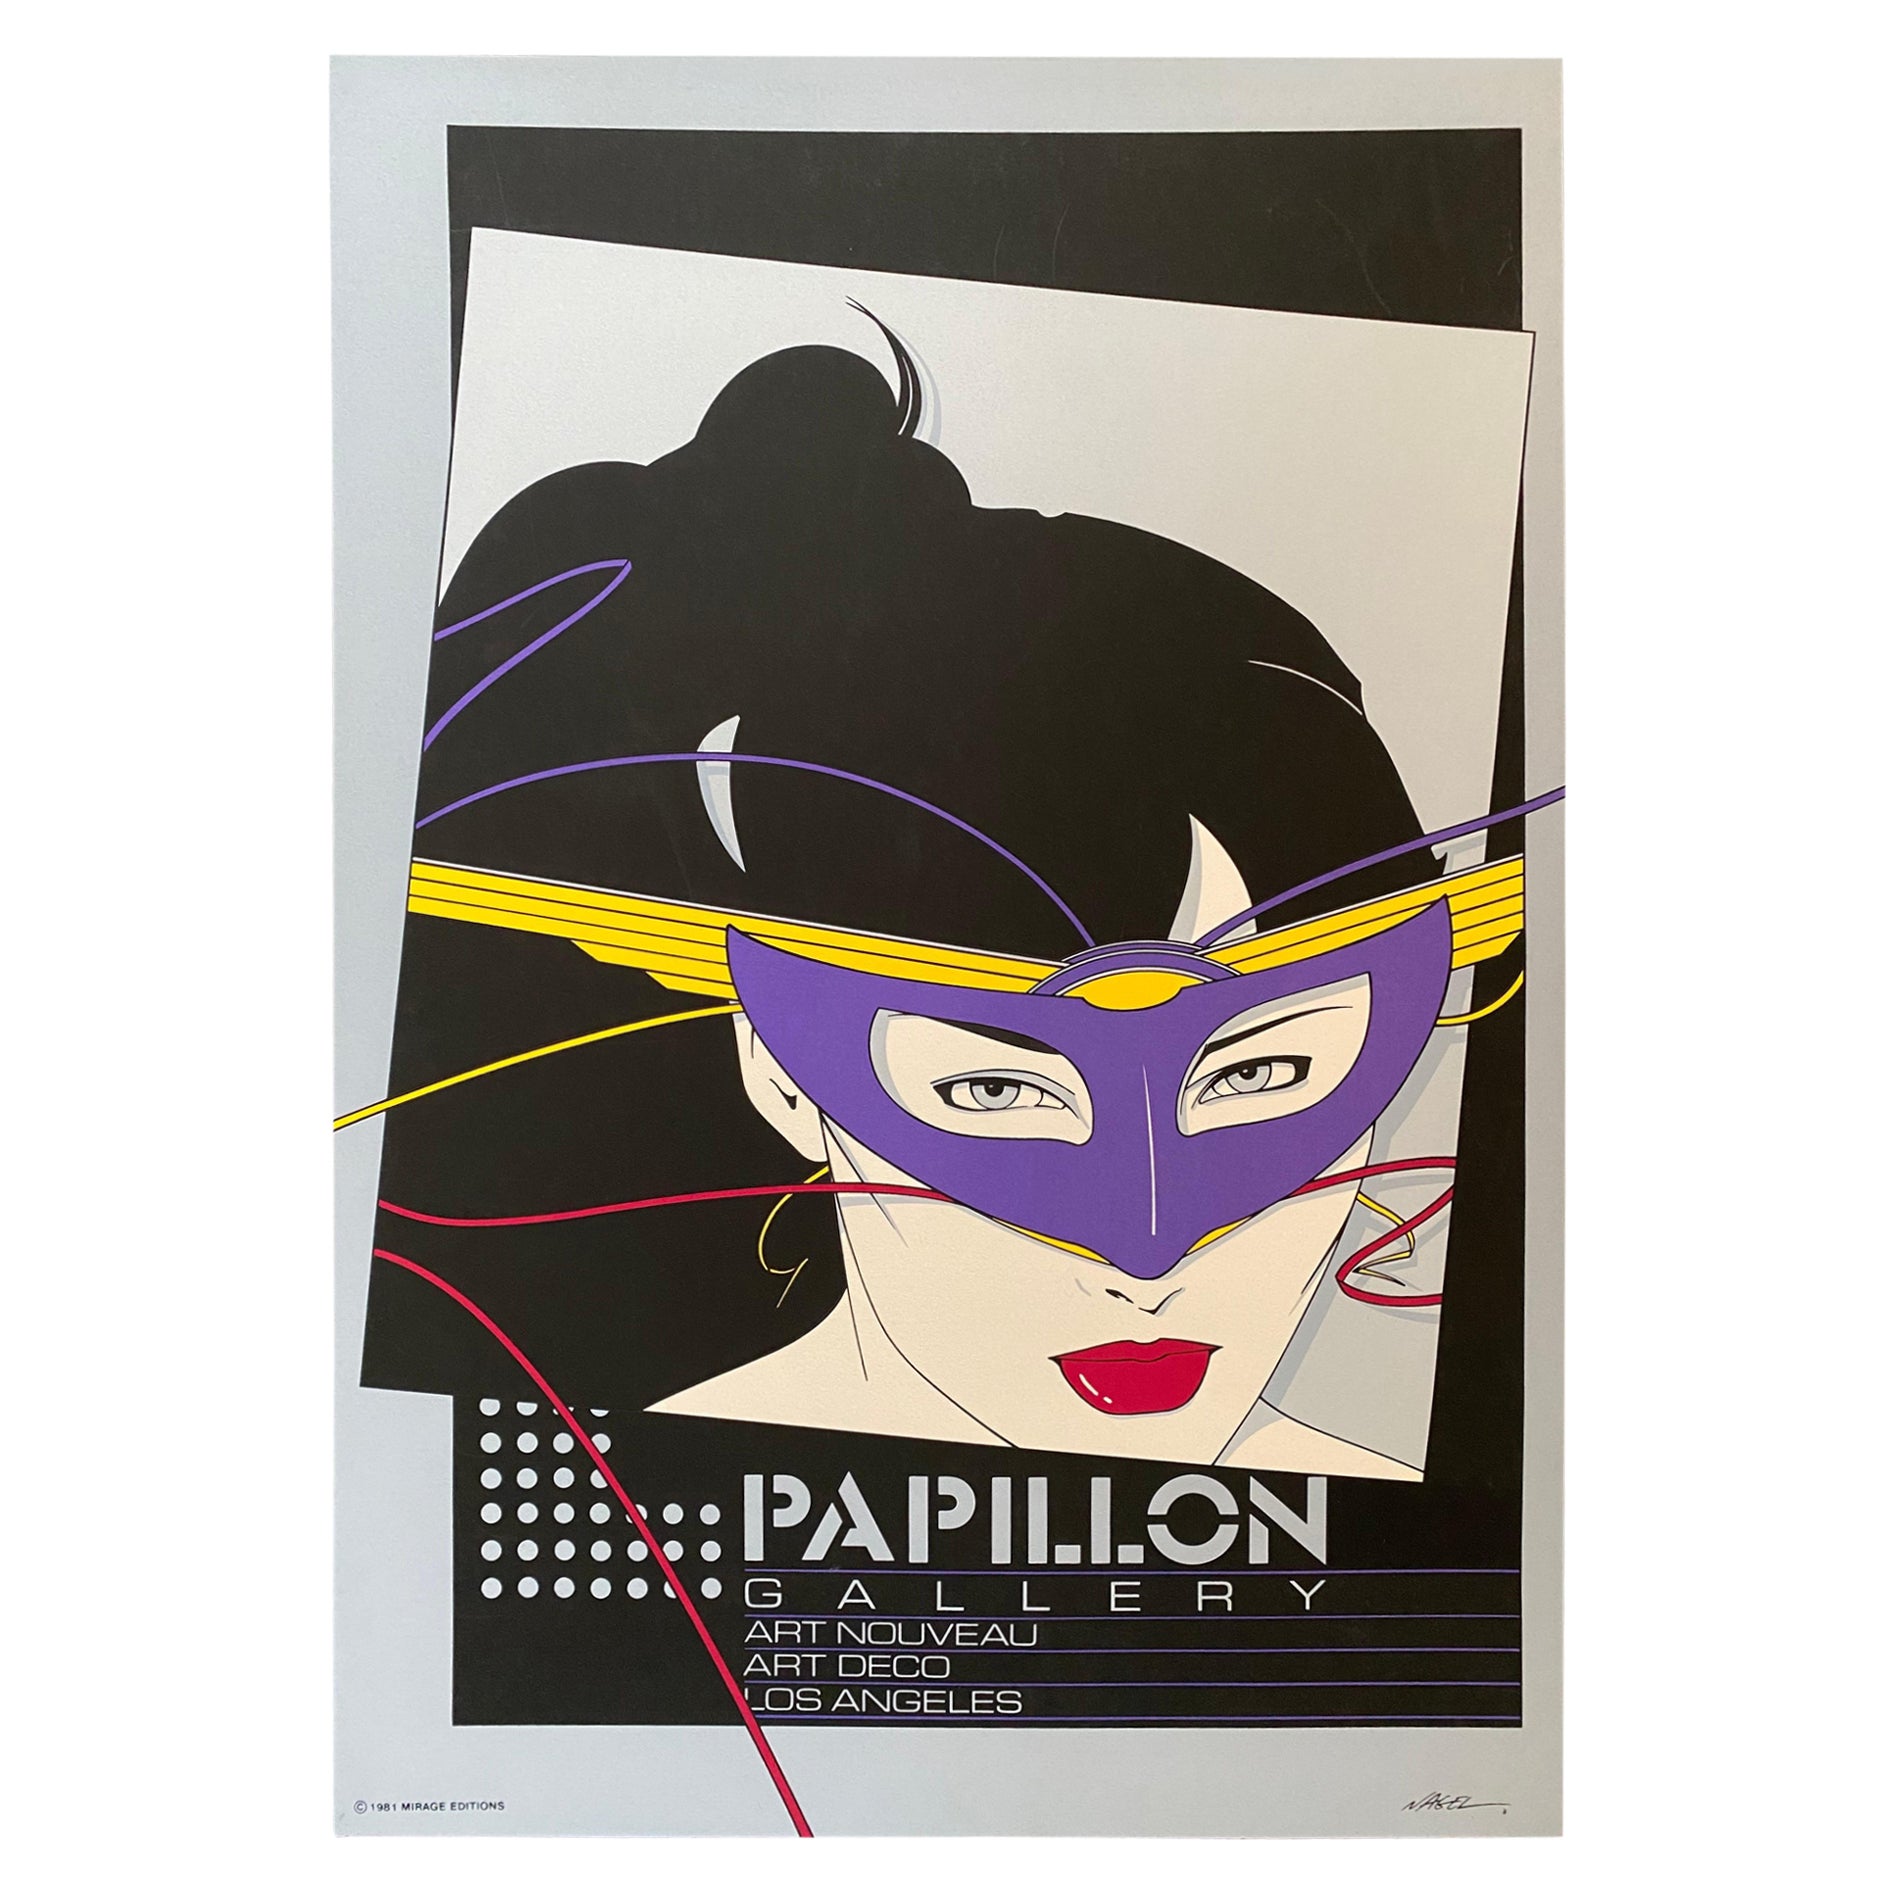 1981 Patrick Nagel Papillon Gallery Los Angeles, Mirage Editions Serigraphie